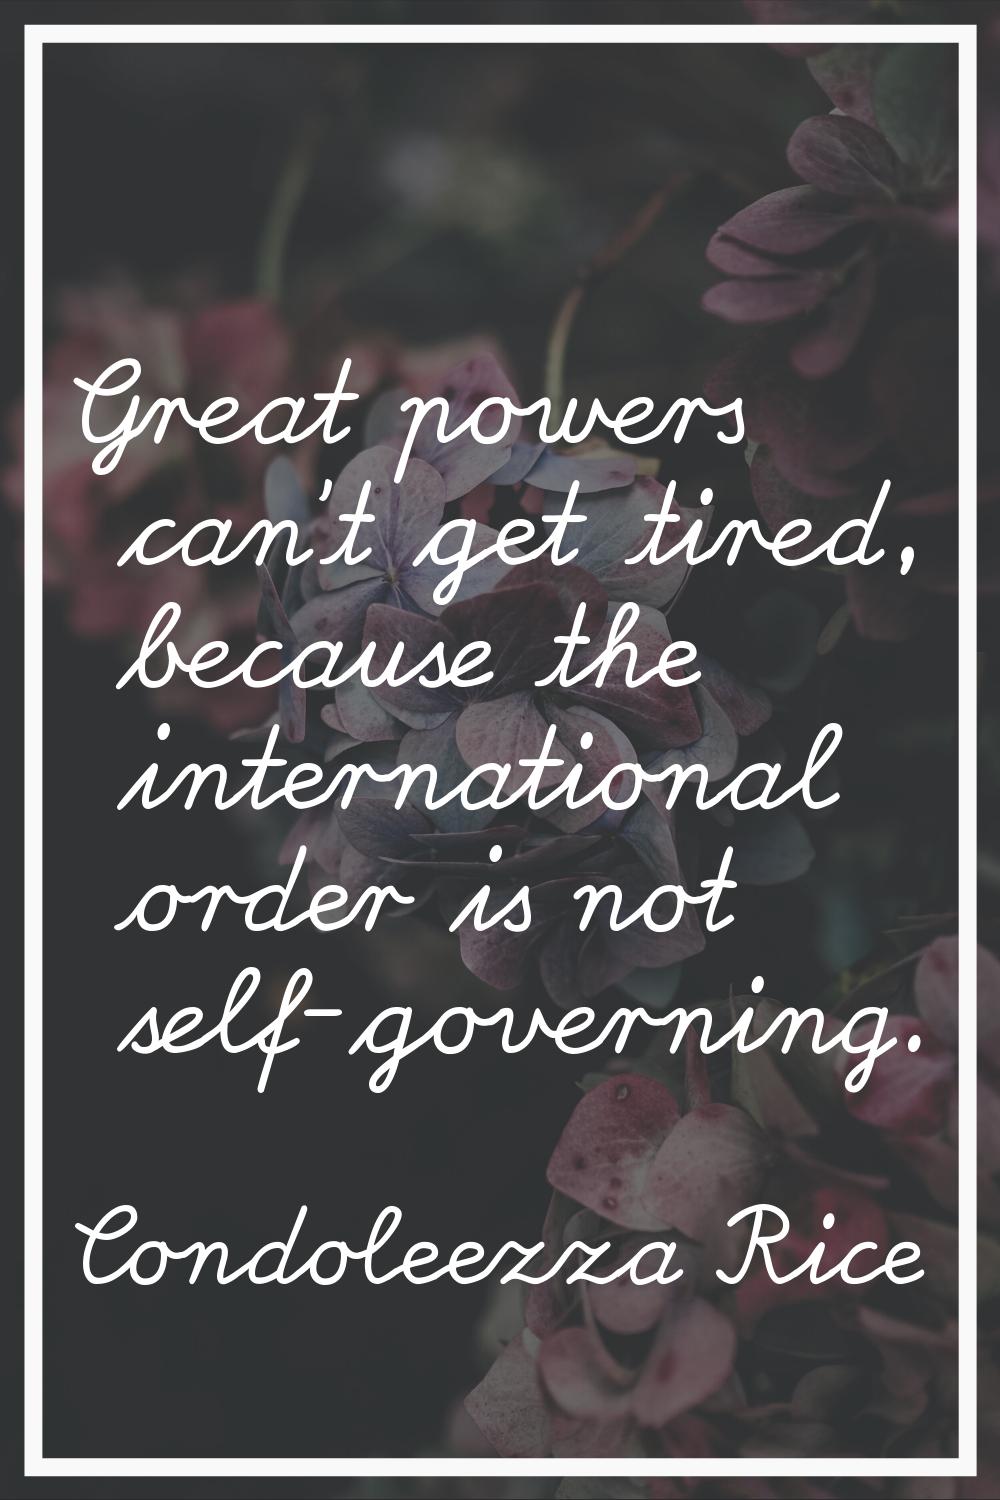 Great powers can't get tired, because the international order is not self-governing.